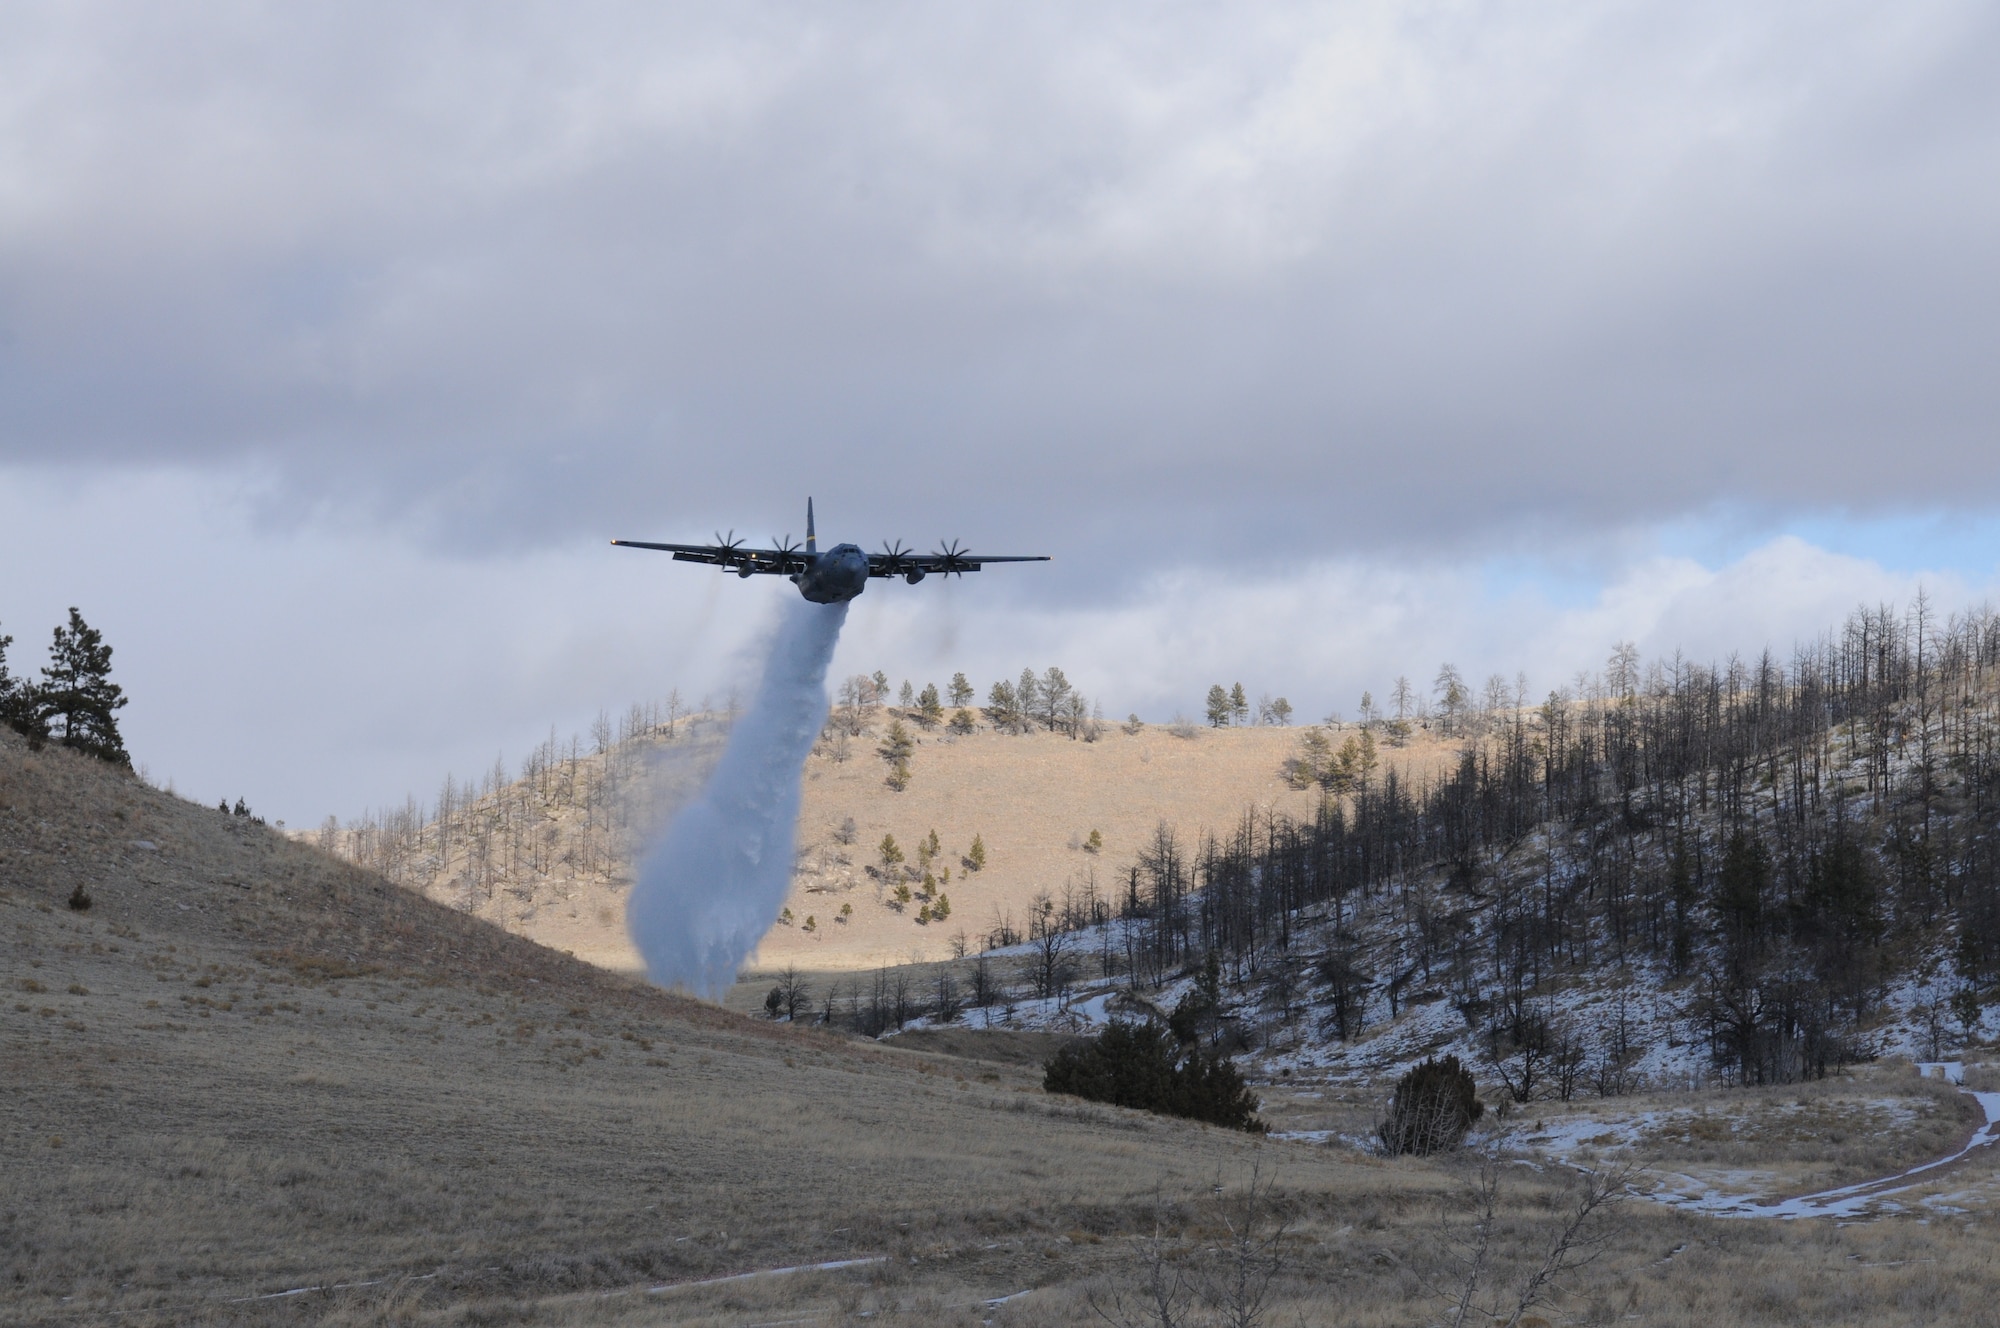 A C-130H Hercules aircraft assigned to the 153rd Airlift Wing, Wyoming Air National Guard sprays water over Camp Guernsey, Wyoming during Modular Airborne Fire Fighting System training. The training is being performed using a C-130 modified with an Electronic Propeller Control System and eight-bladed propeller system. (Courtesy photo)